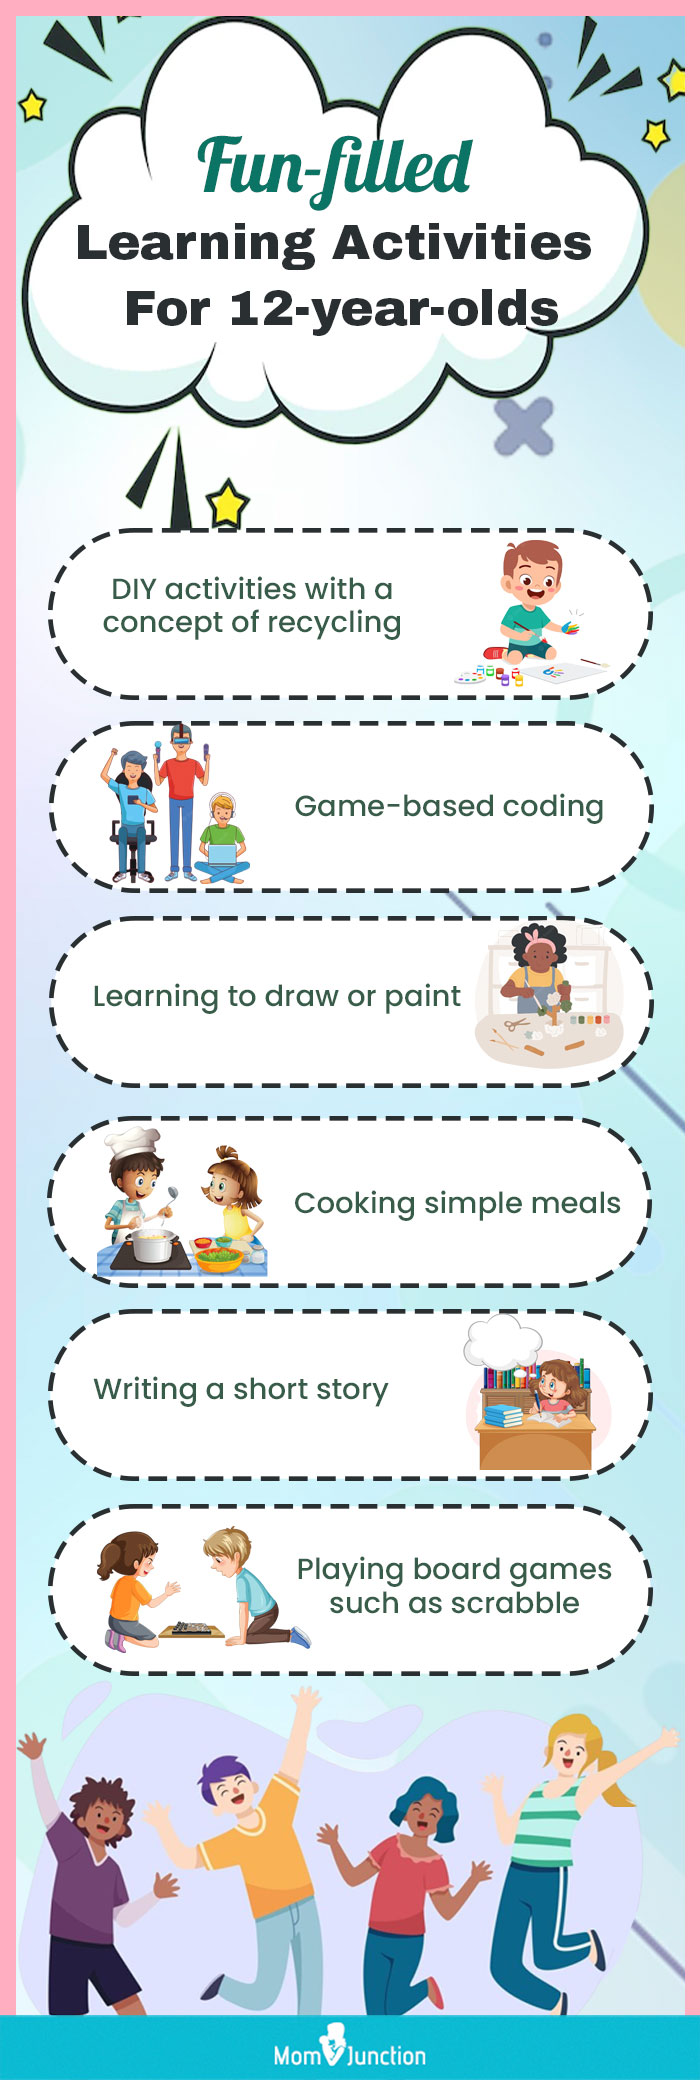 https://www.momjunction.com/wp-content/uploads/2020/07/Infographic-Activities-That-Are-Fun-And-Facilitate-Learning.jpg